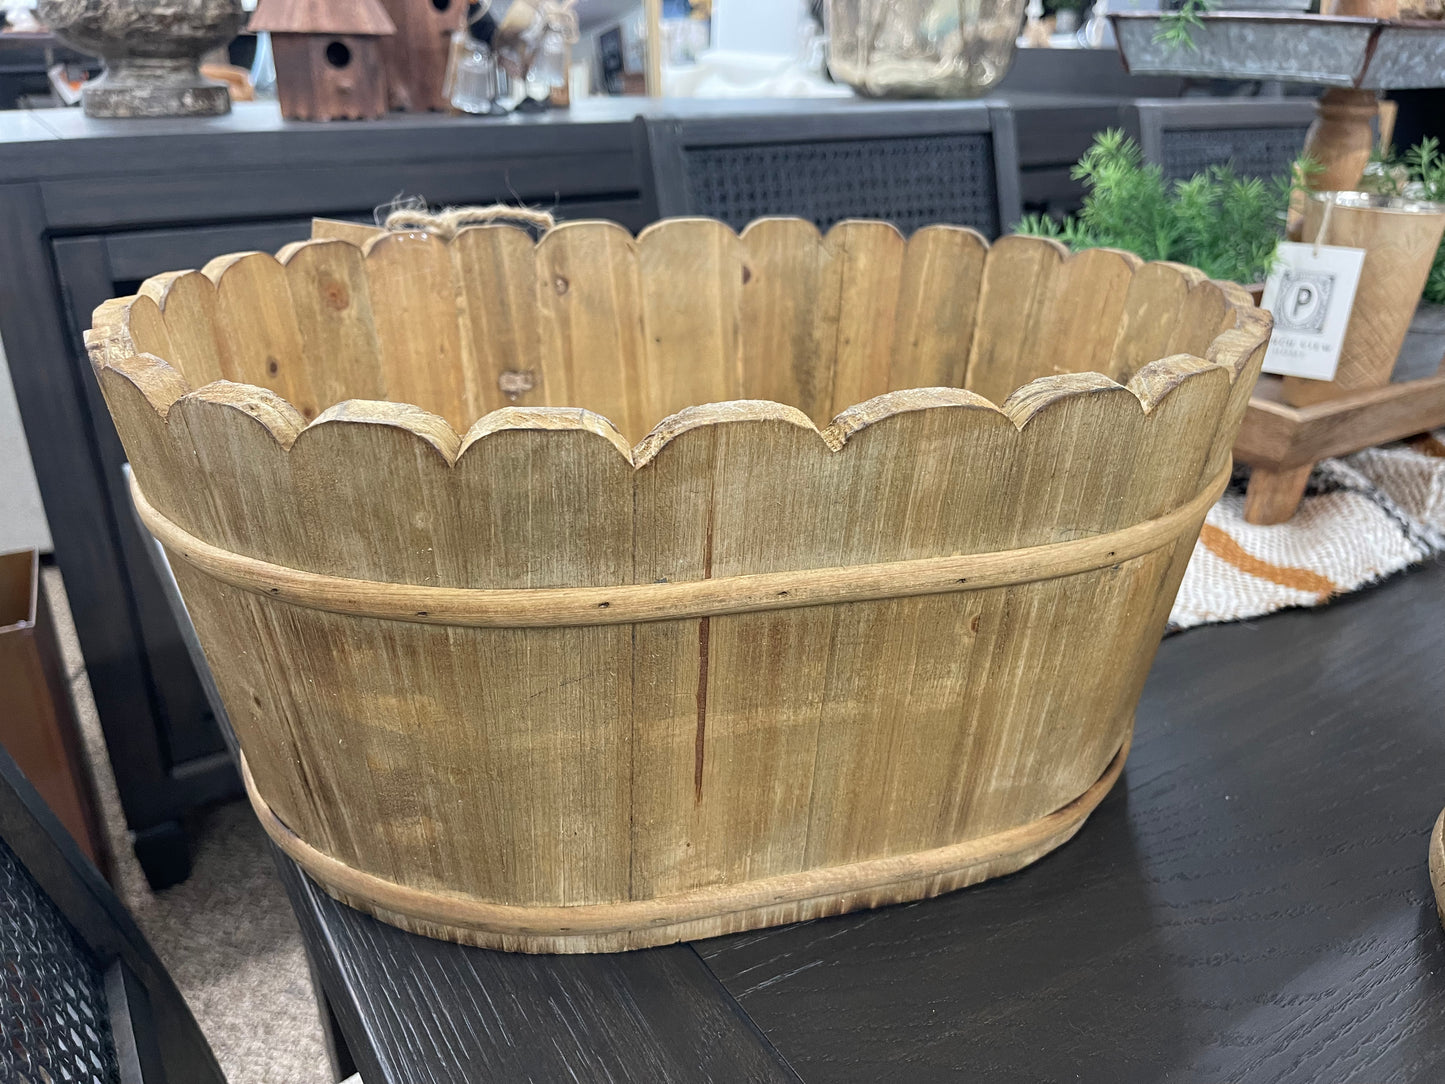 Scalloped LG Wooded Planter